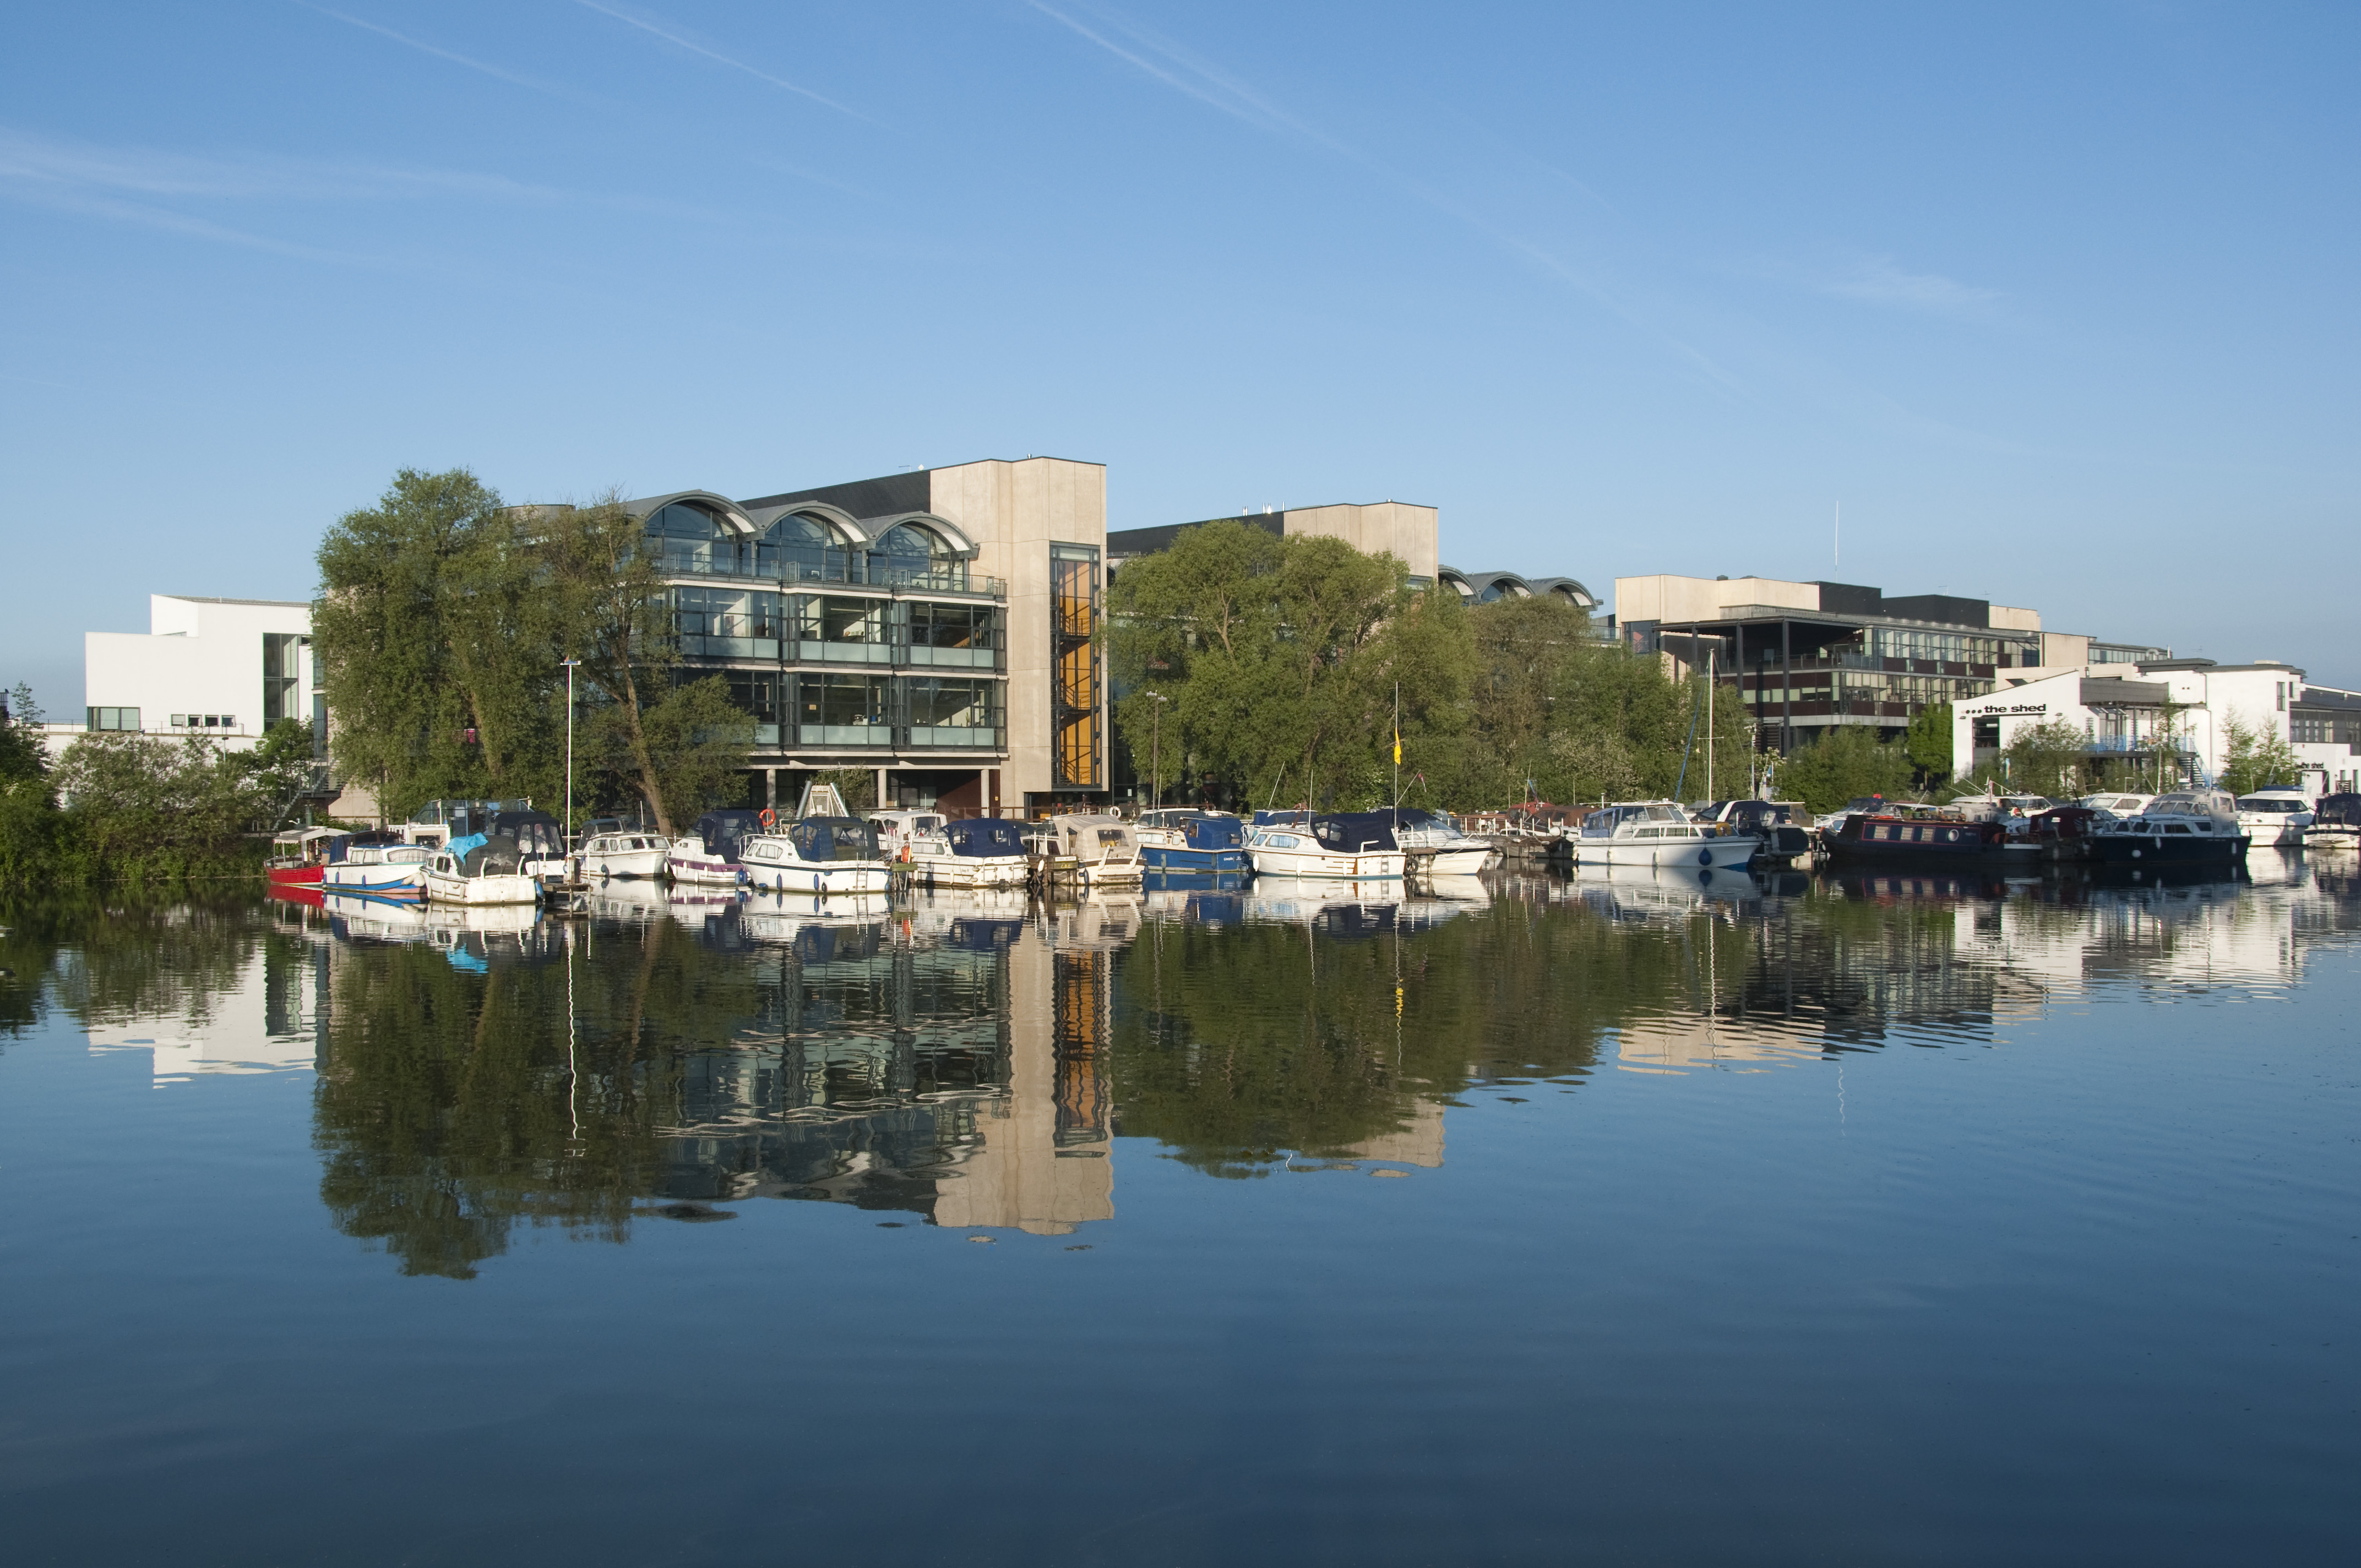 Brayford Pool, Image courtesy of University of Lincoln - www.lincoln.ac.uk